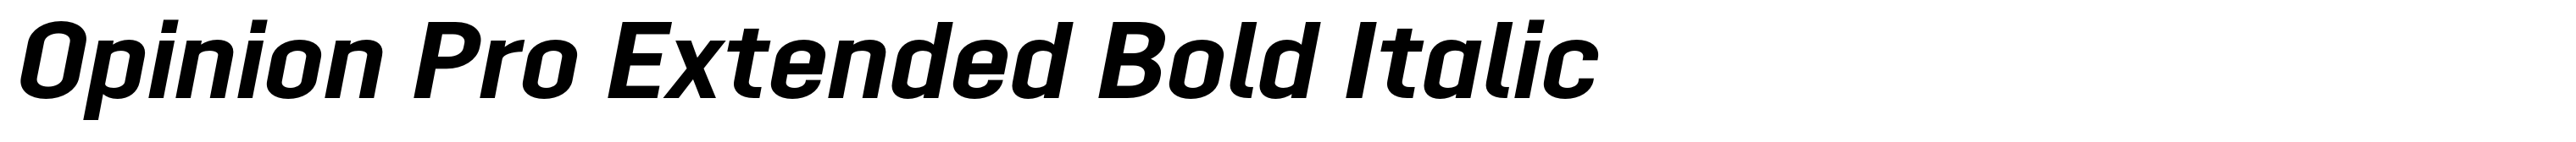 Opinion Pro Extended Bold Italic